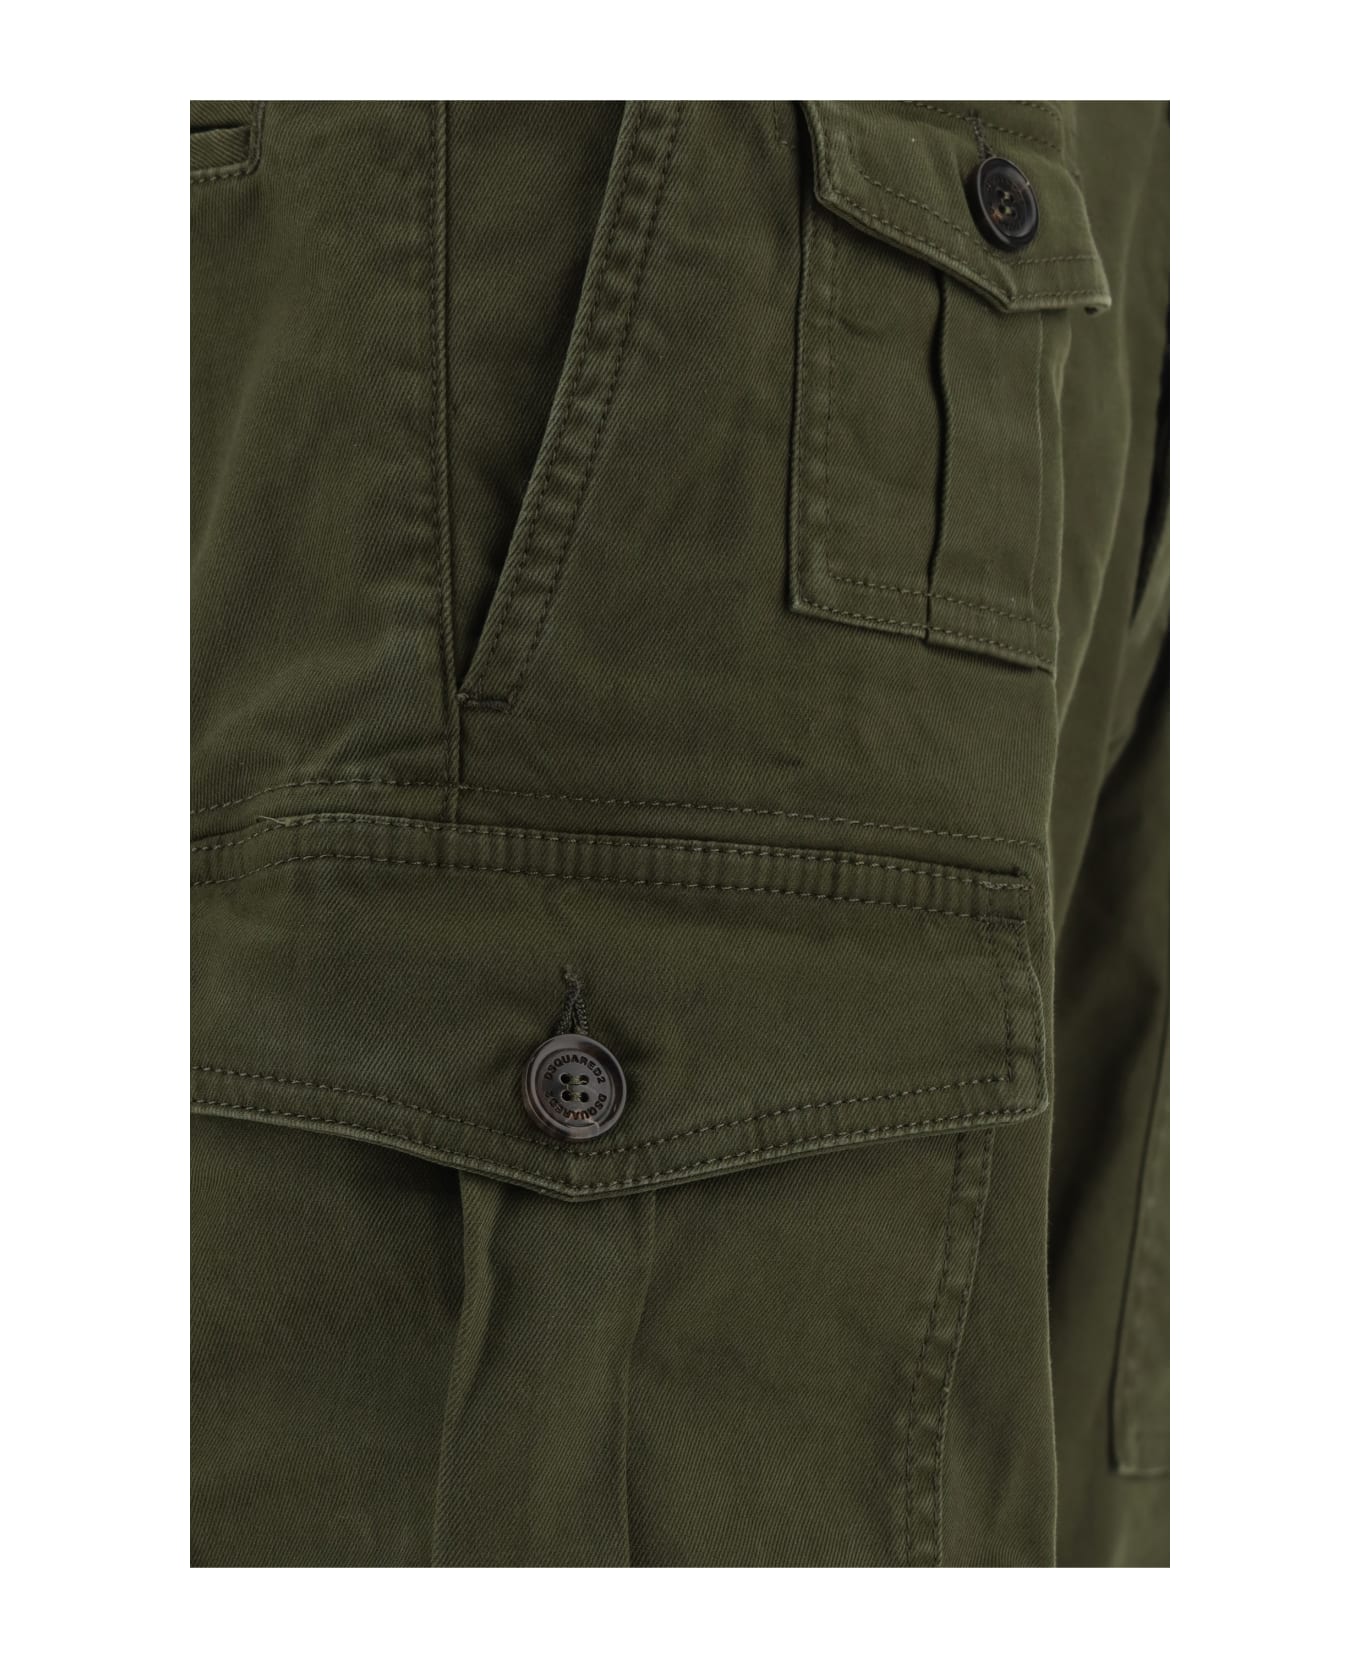 Dsquared2 Pants - Military Green